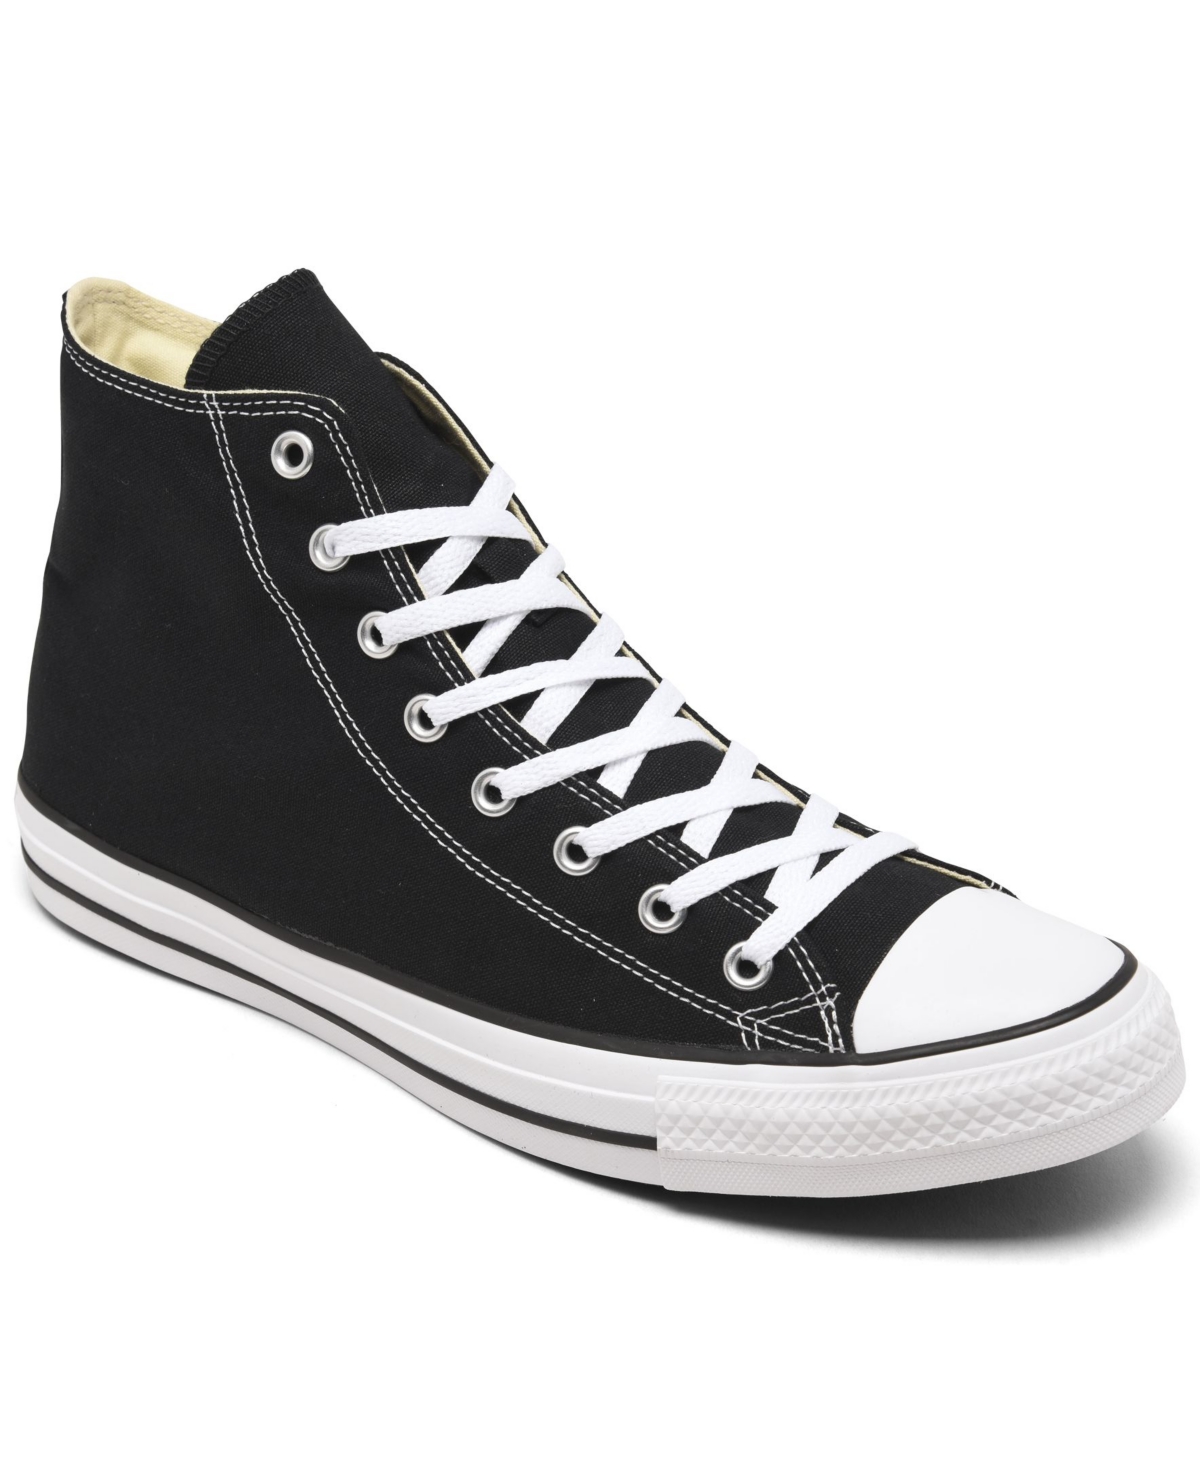 UPC 022859471022 product image for Converse Men's Chuck Taylor Hi Top Casual Sneakers from Finish Line | upcitemdb.com